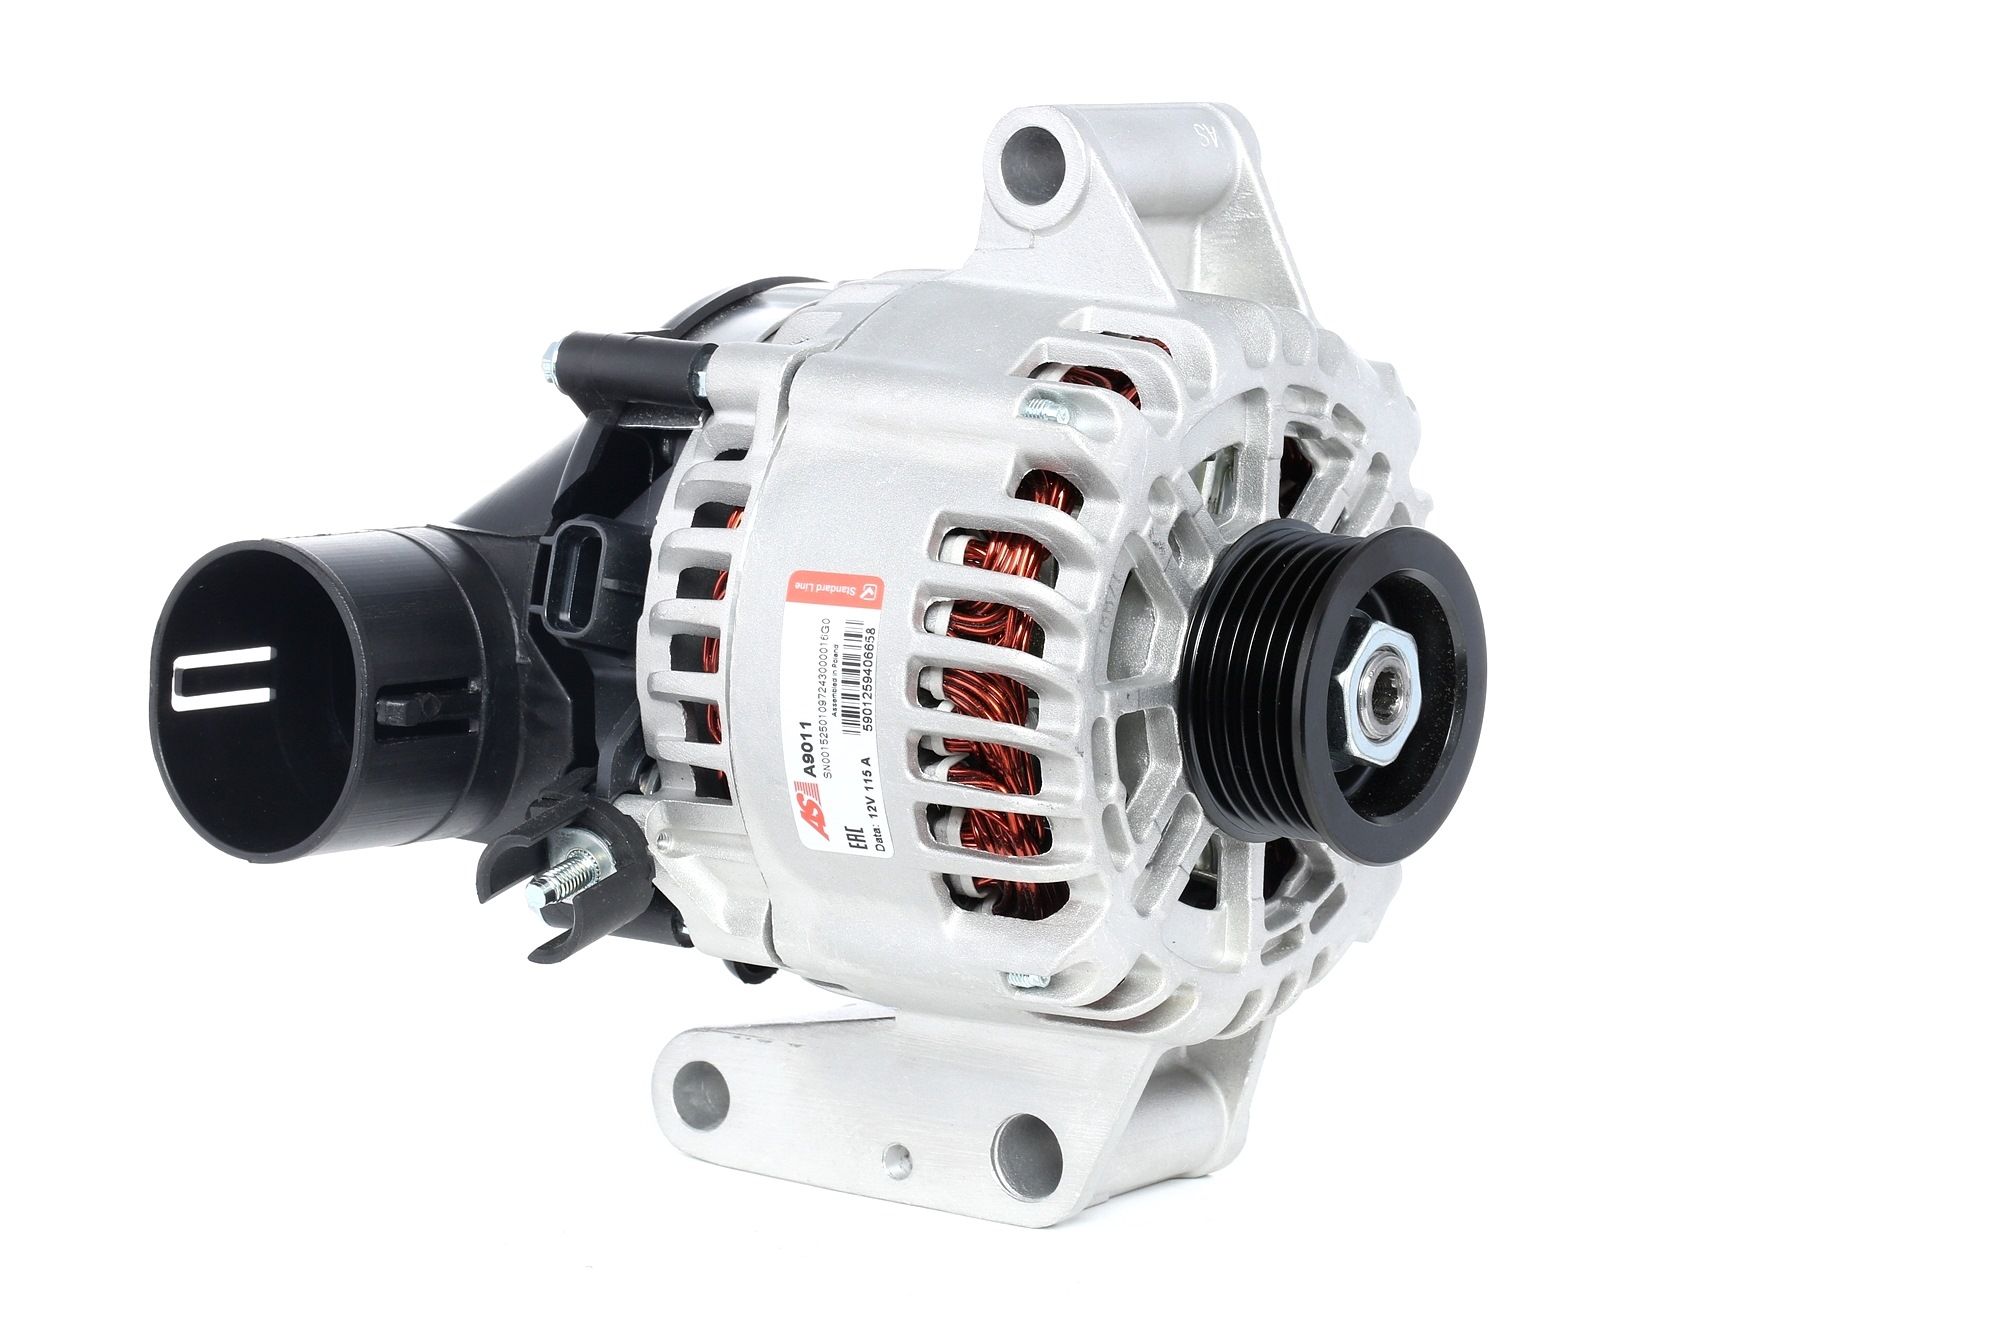 Ford Alternator AS-PL A9011 at a good price